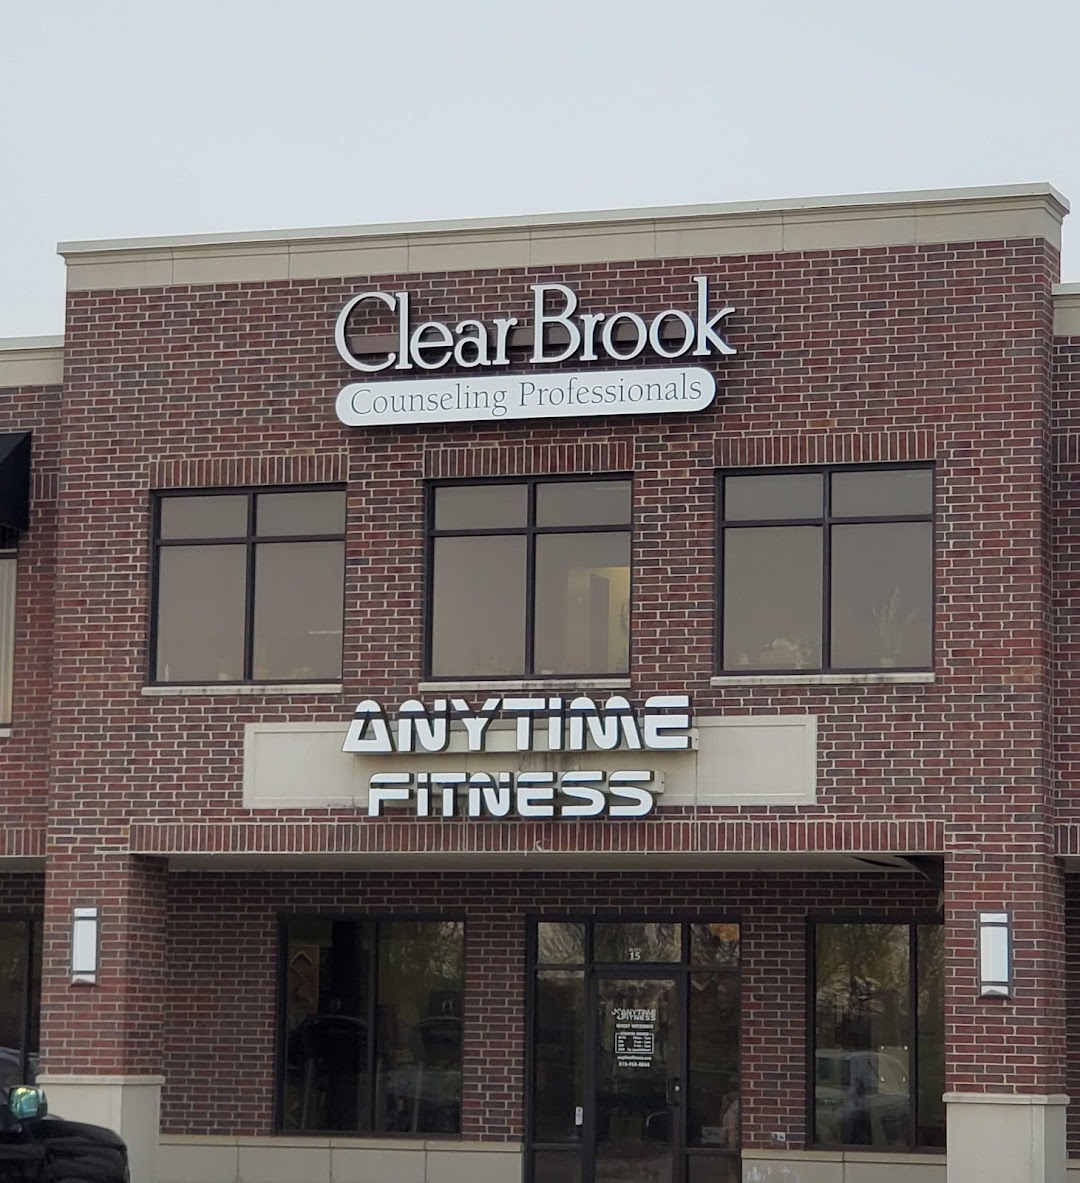 Clear Brook Counseling Professionals, Ankeny